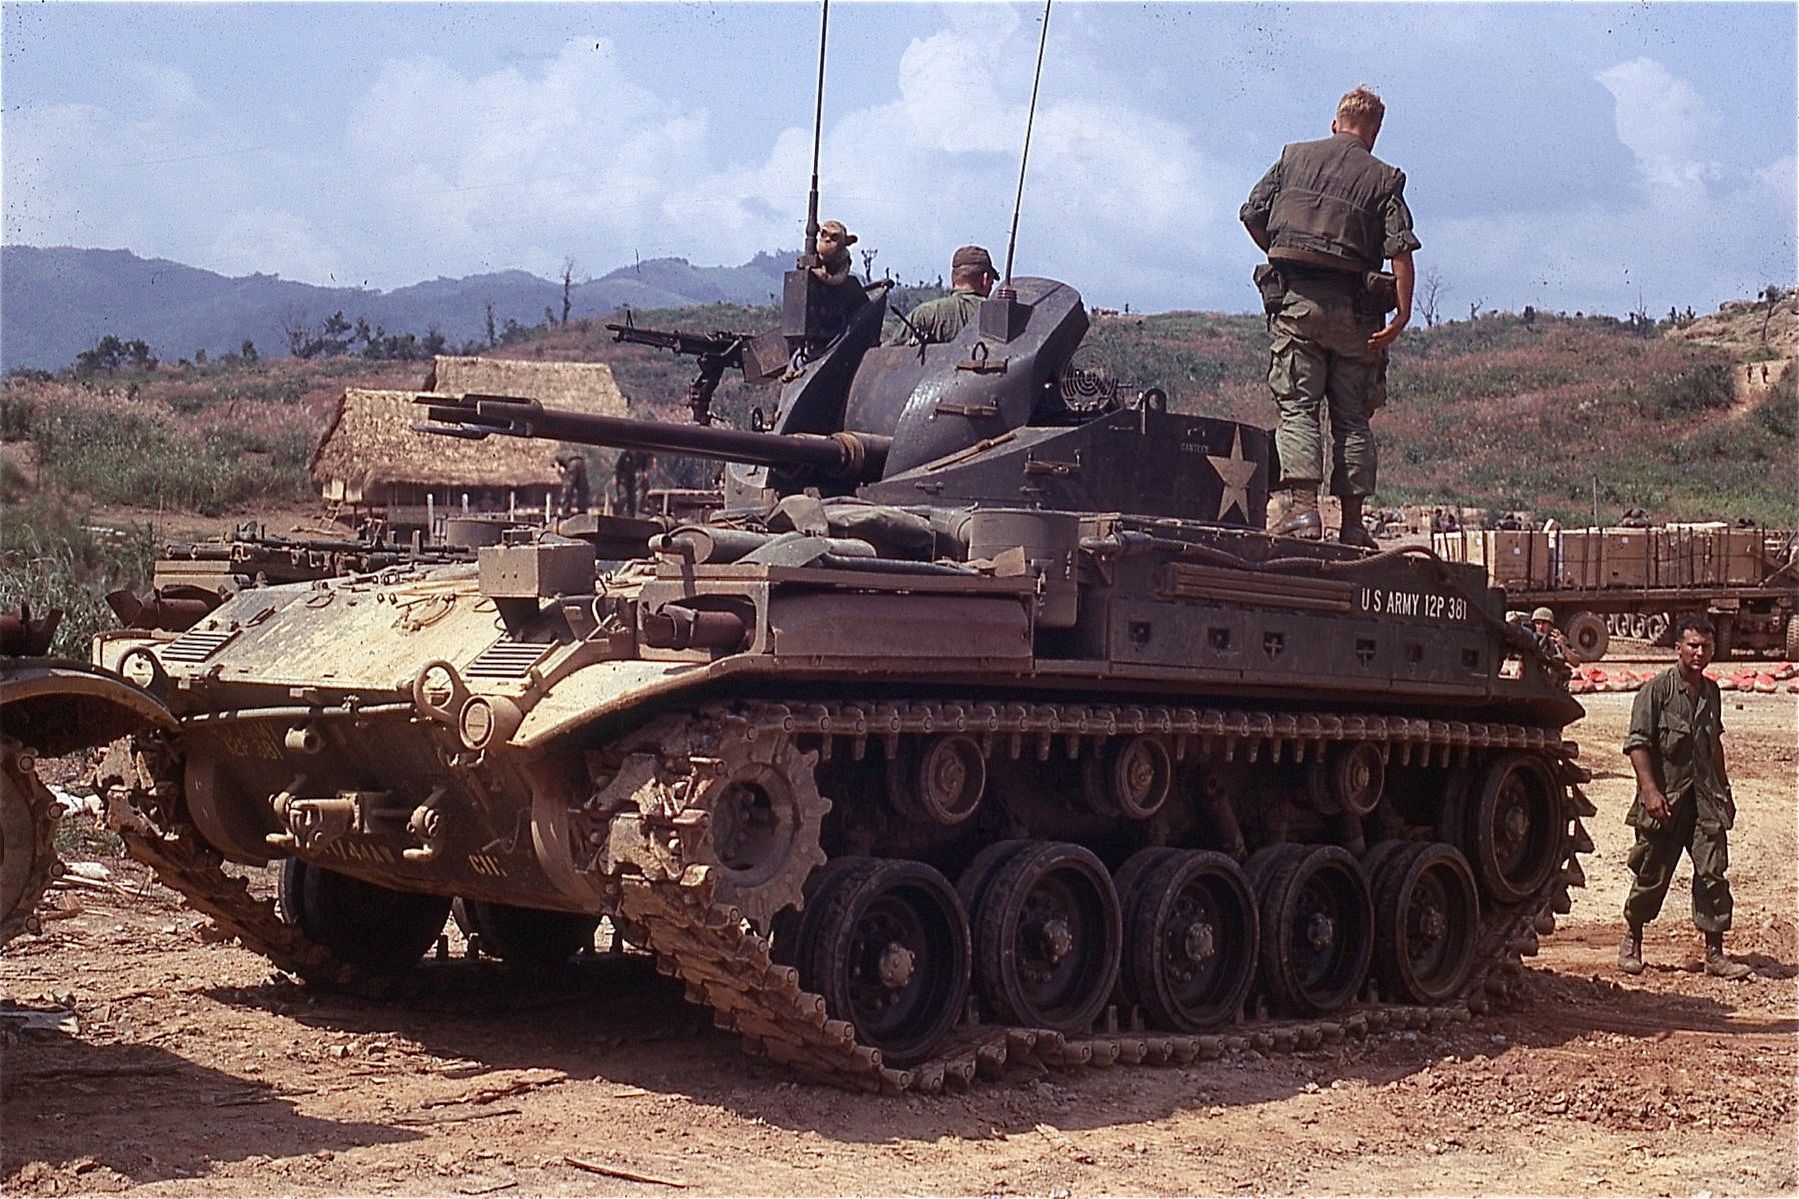 M42 Duster in Vietnam image. Click for full size.